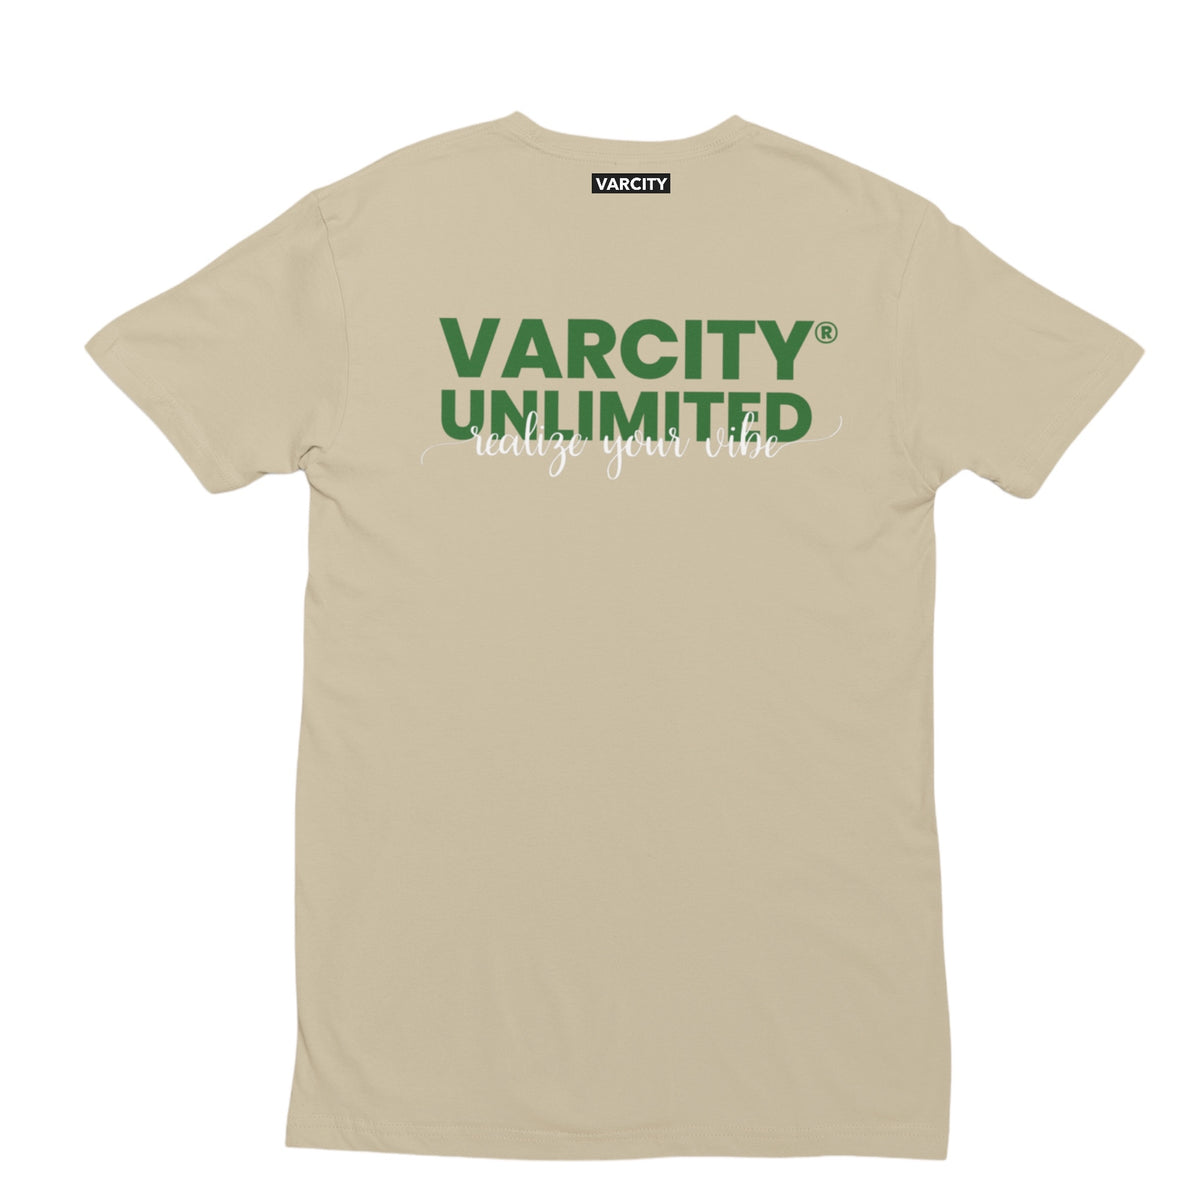 Varcity ® Unlimited Realize Your Vibe T Shirt